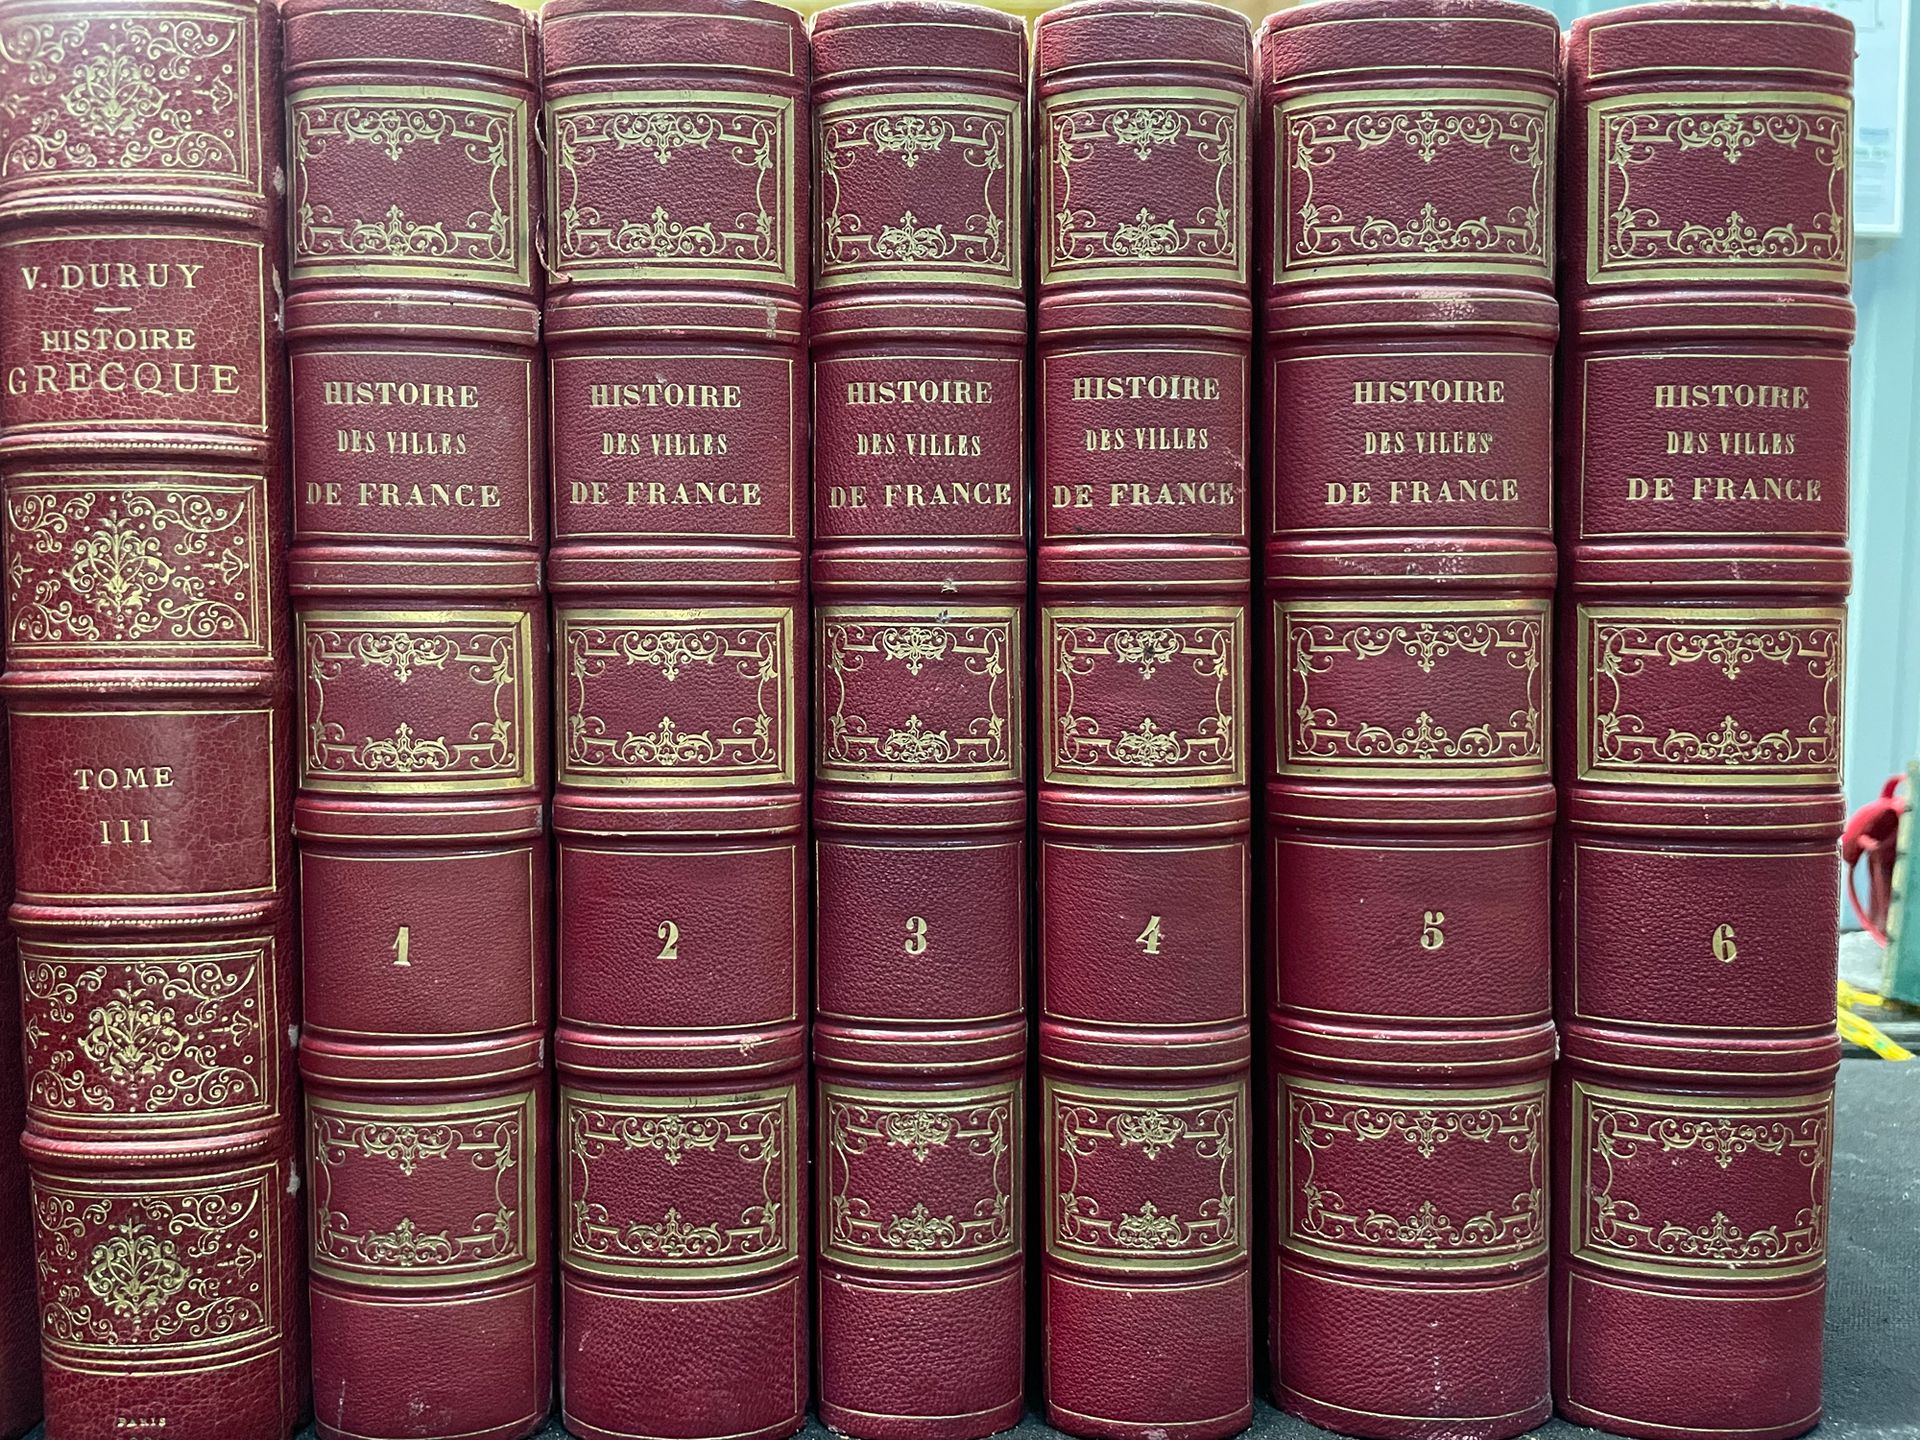 GUIBERT Cities of France.
6 volumes
As is